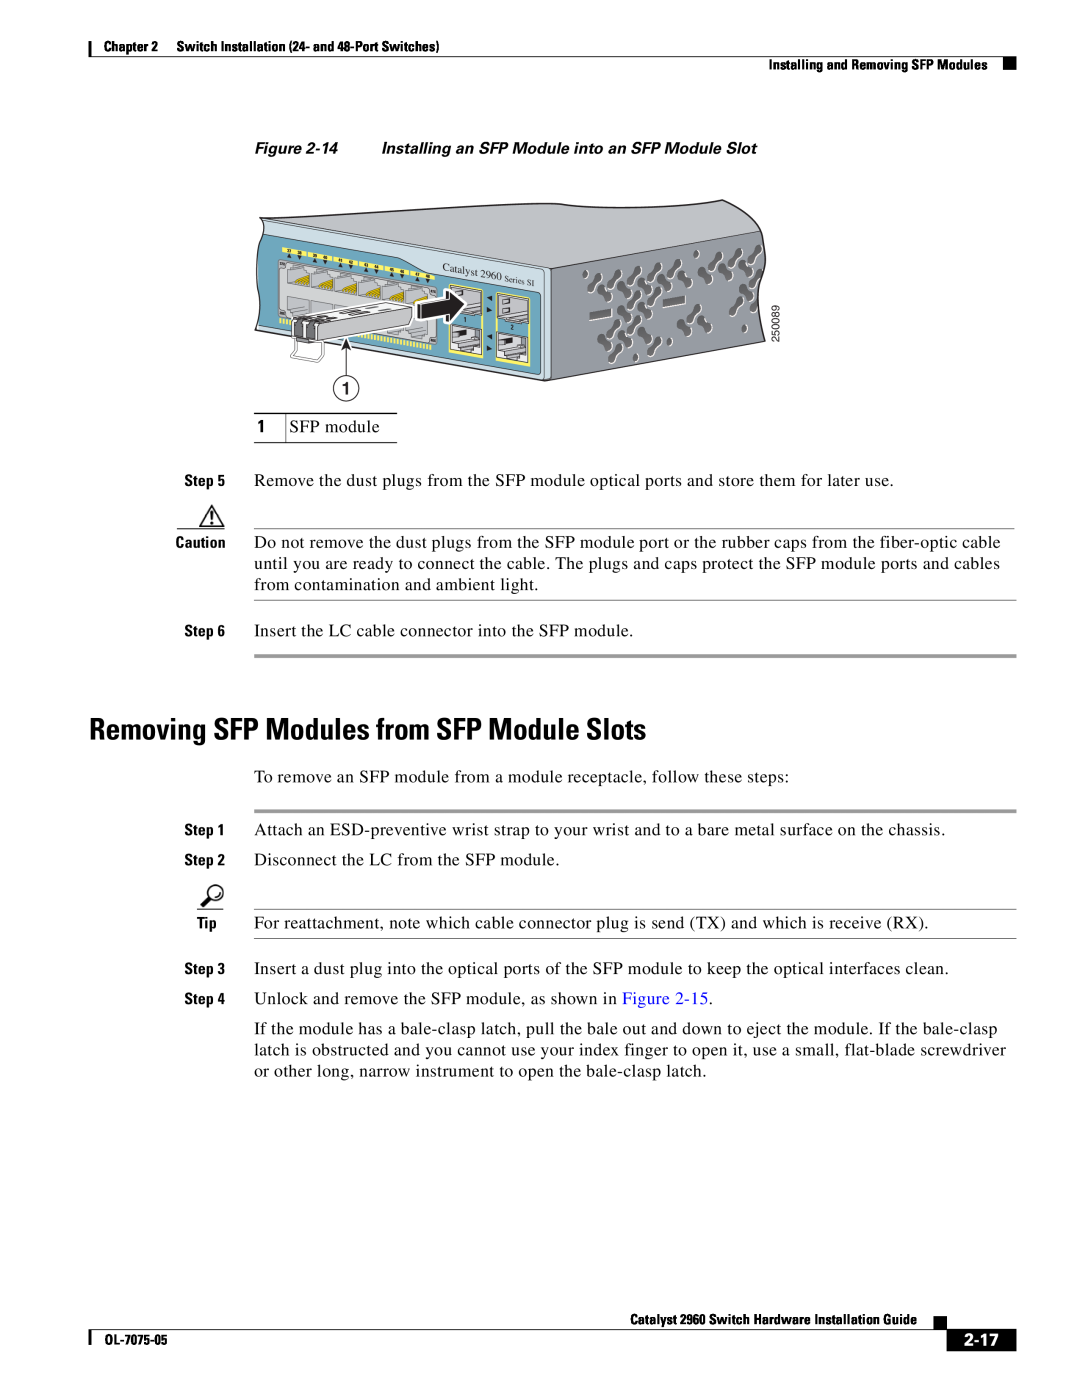 Cisco Systems 2960 specifications Removing SFP Modules from SFP Module Slots, 2-17 